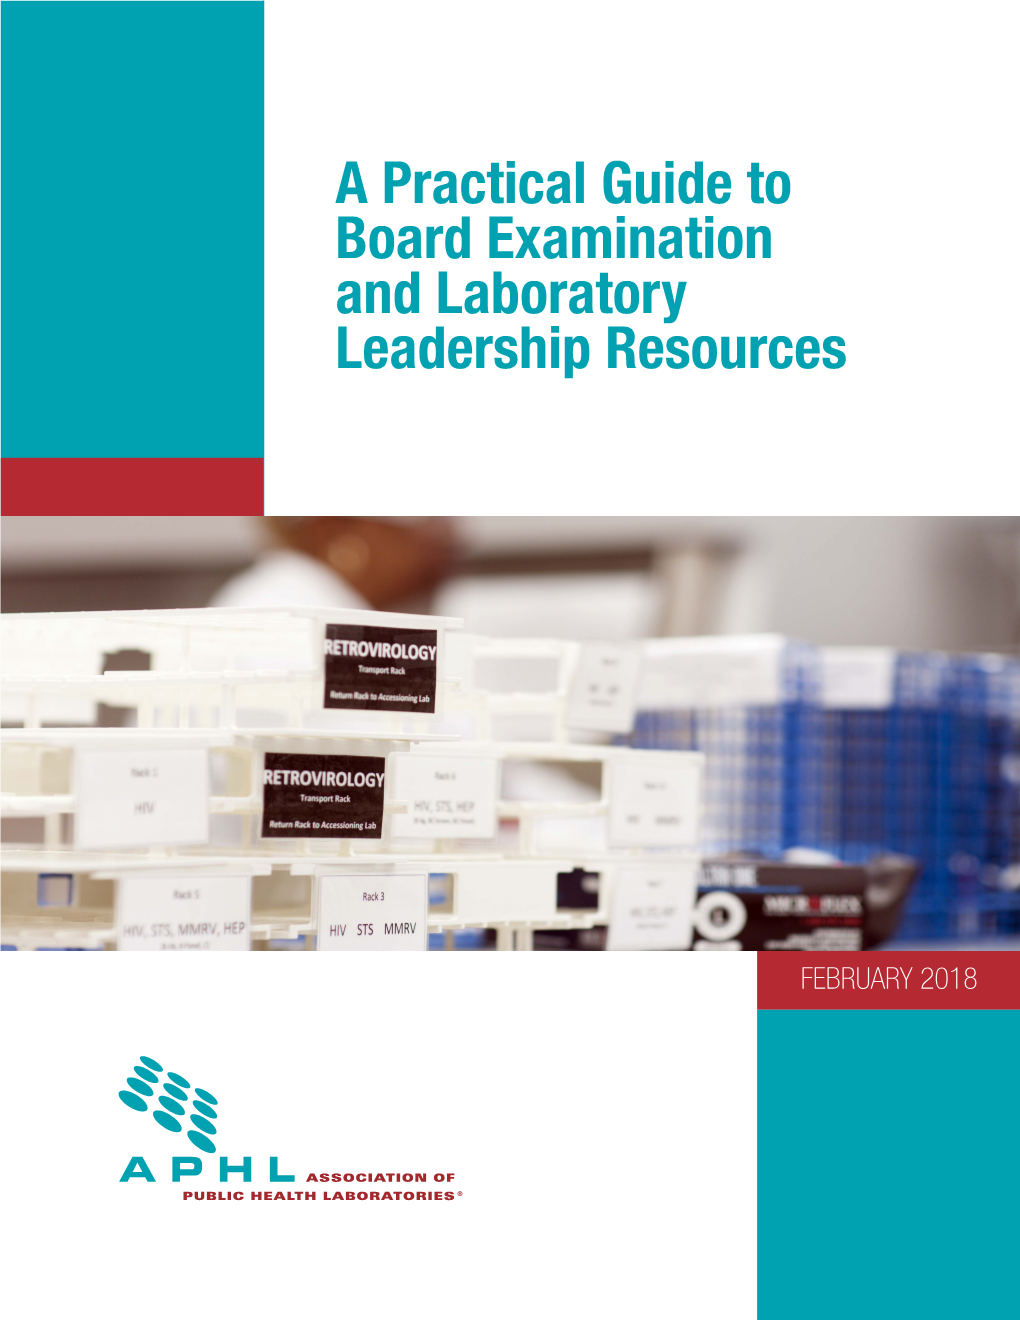 A Practical Guide to Board Examination and Lab Leadership